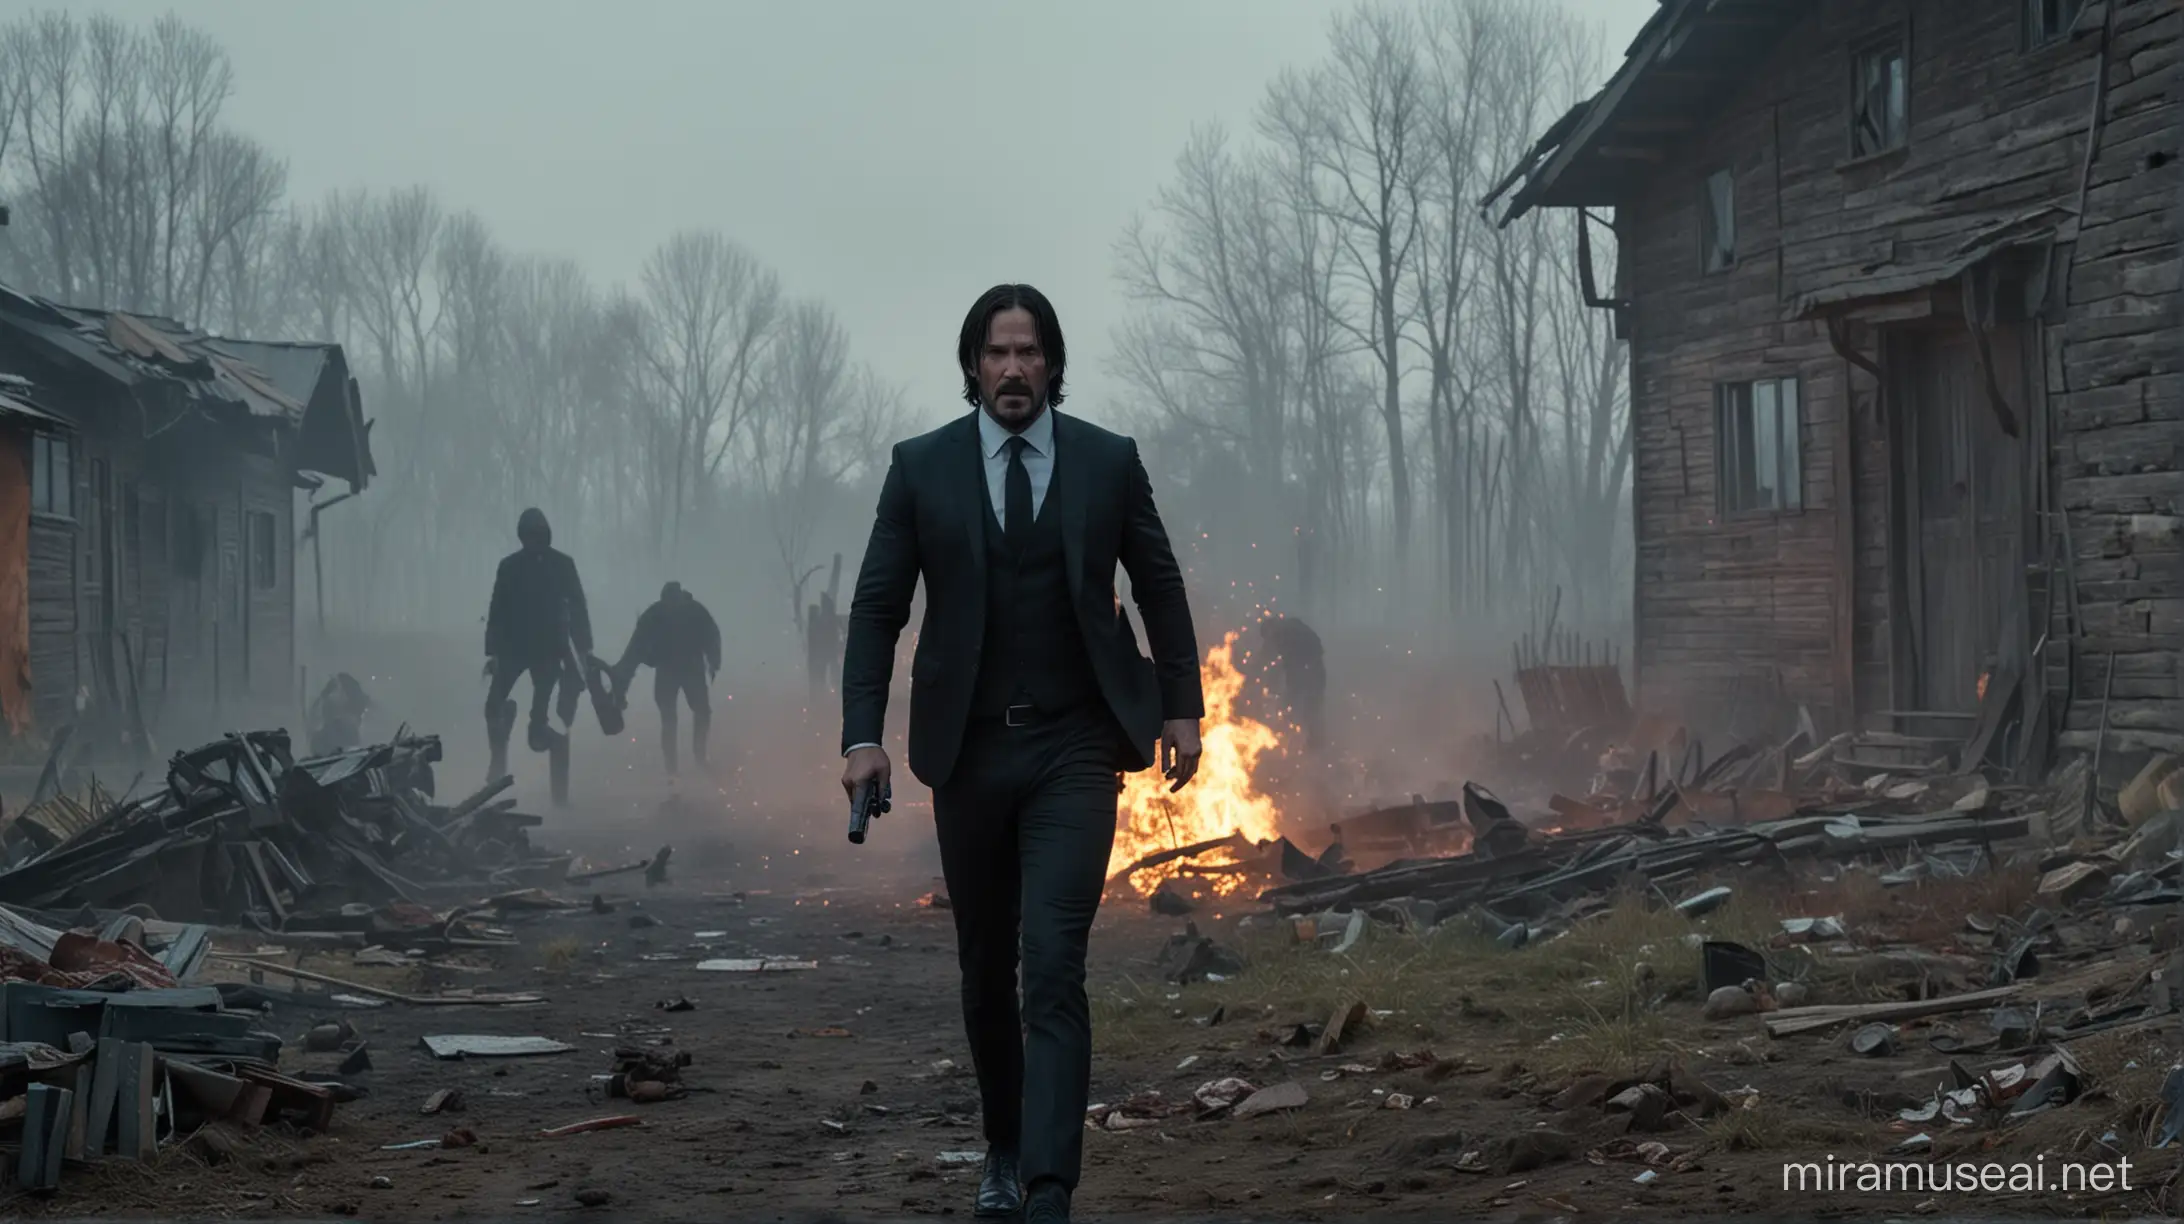 John Wick,fights against zombies in a Russian village
